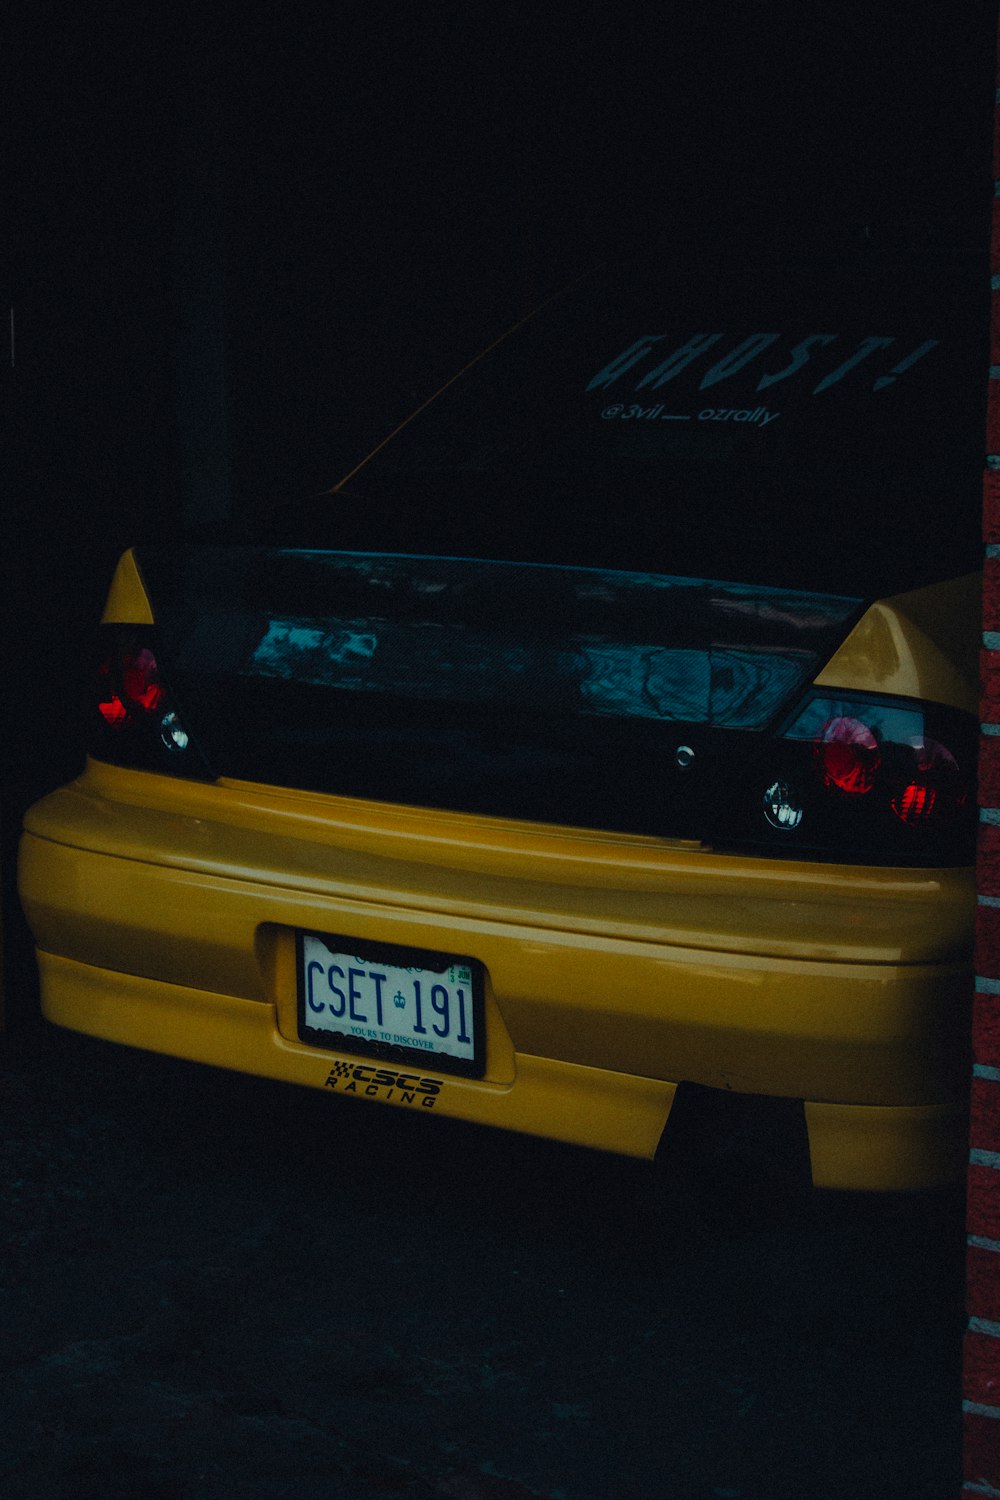 the back end of a yellow car parked in a garage